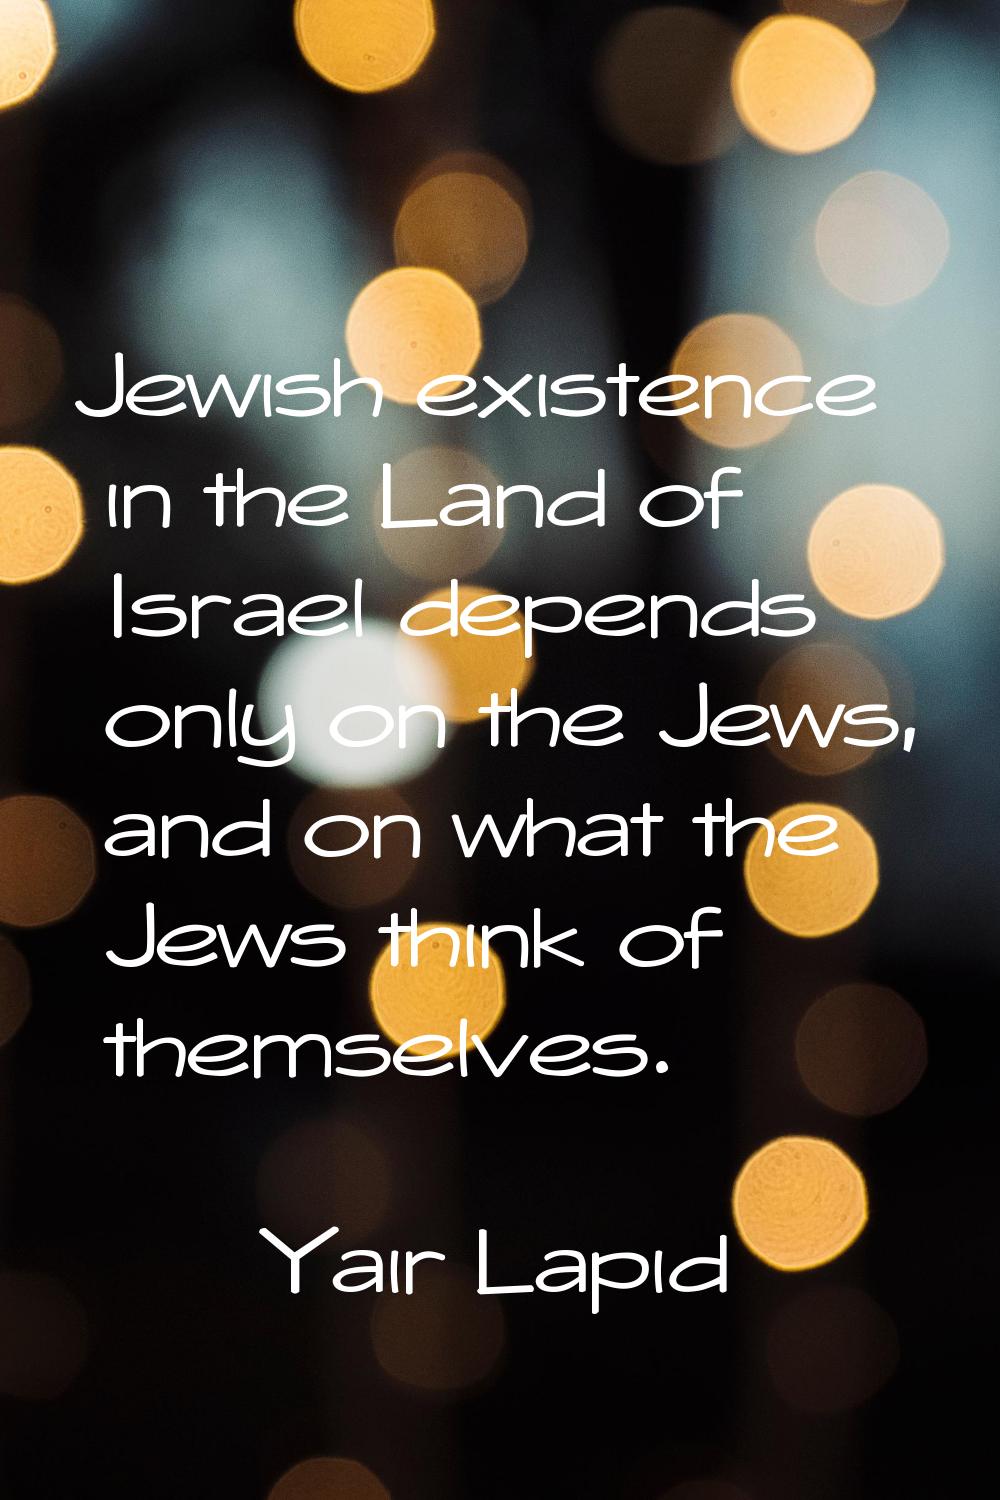 Jewish existence in the Land of Israel depends only on the Jews, and on what the Jews think of them